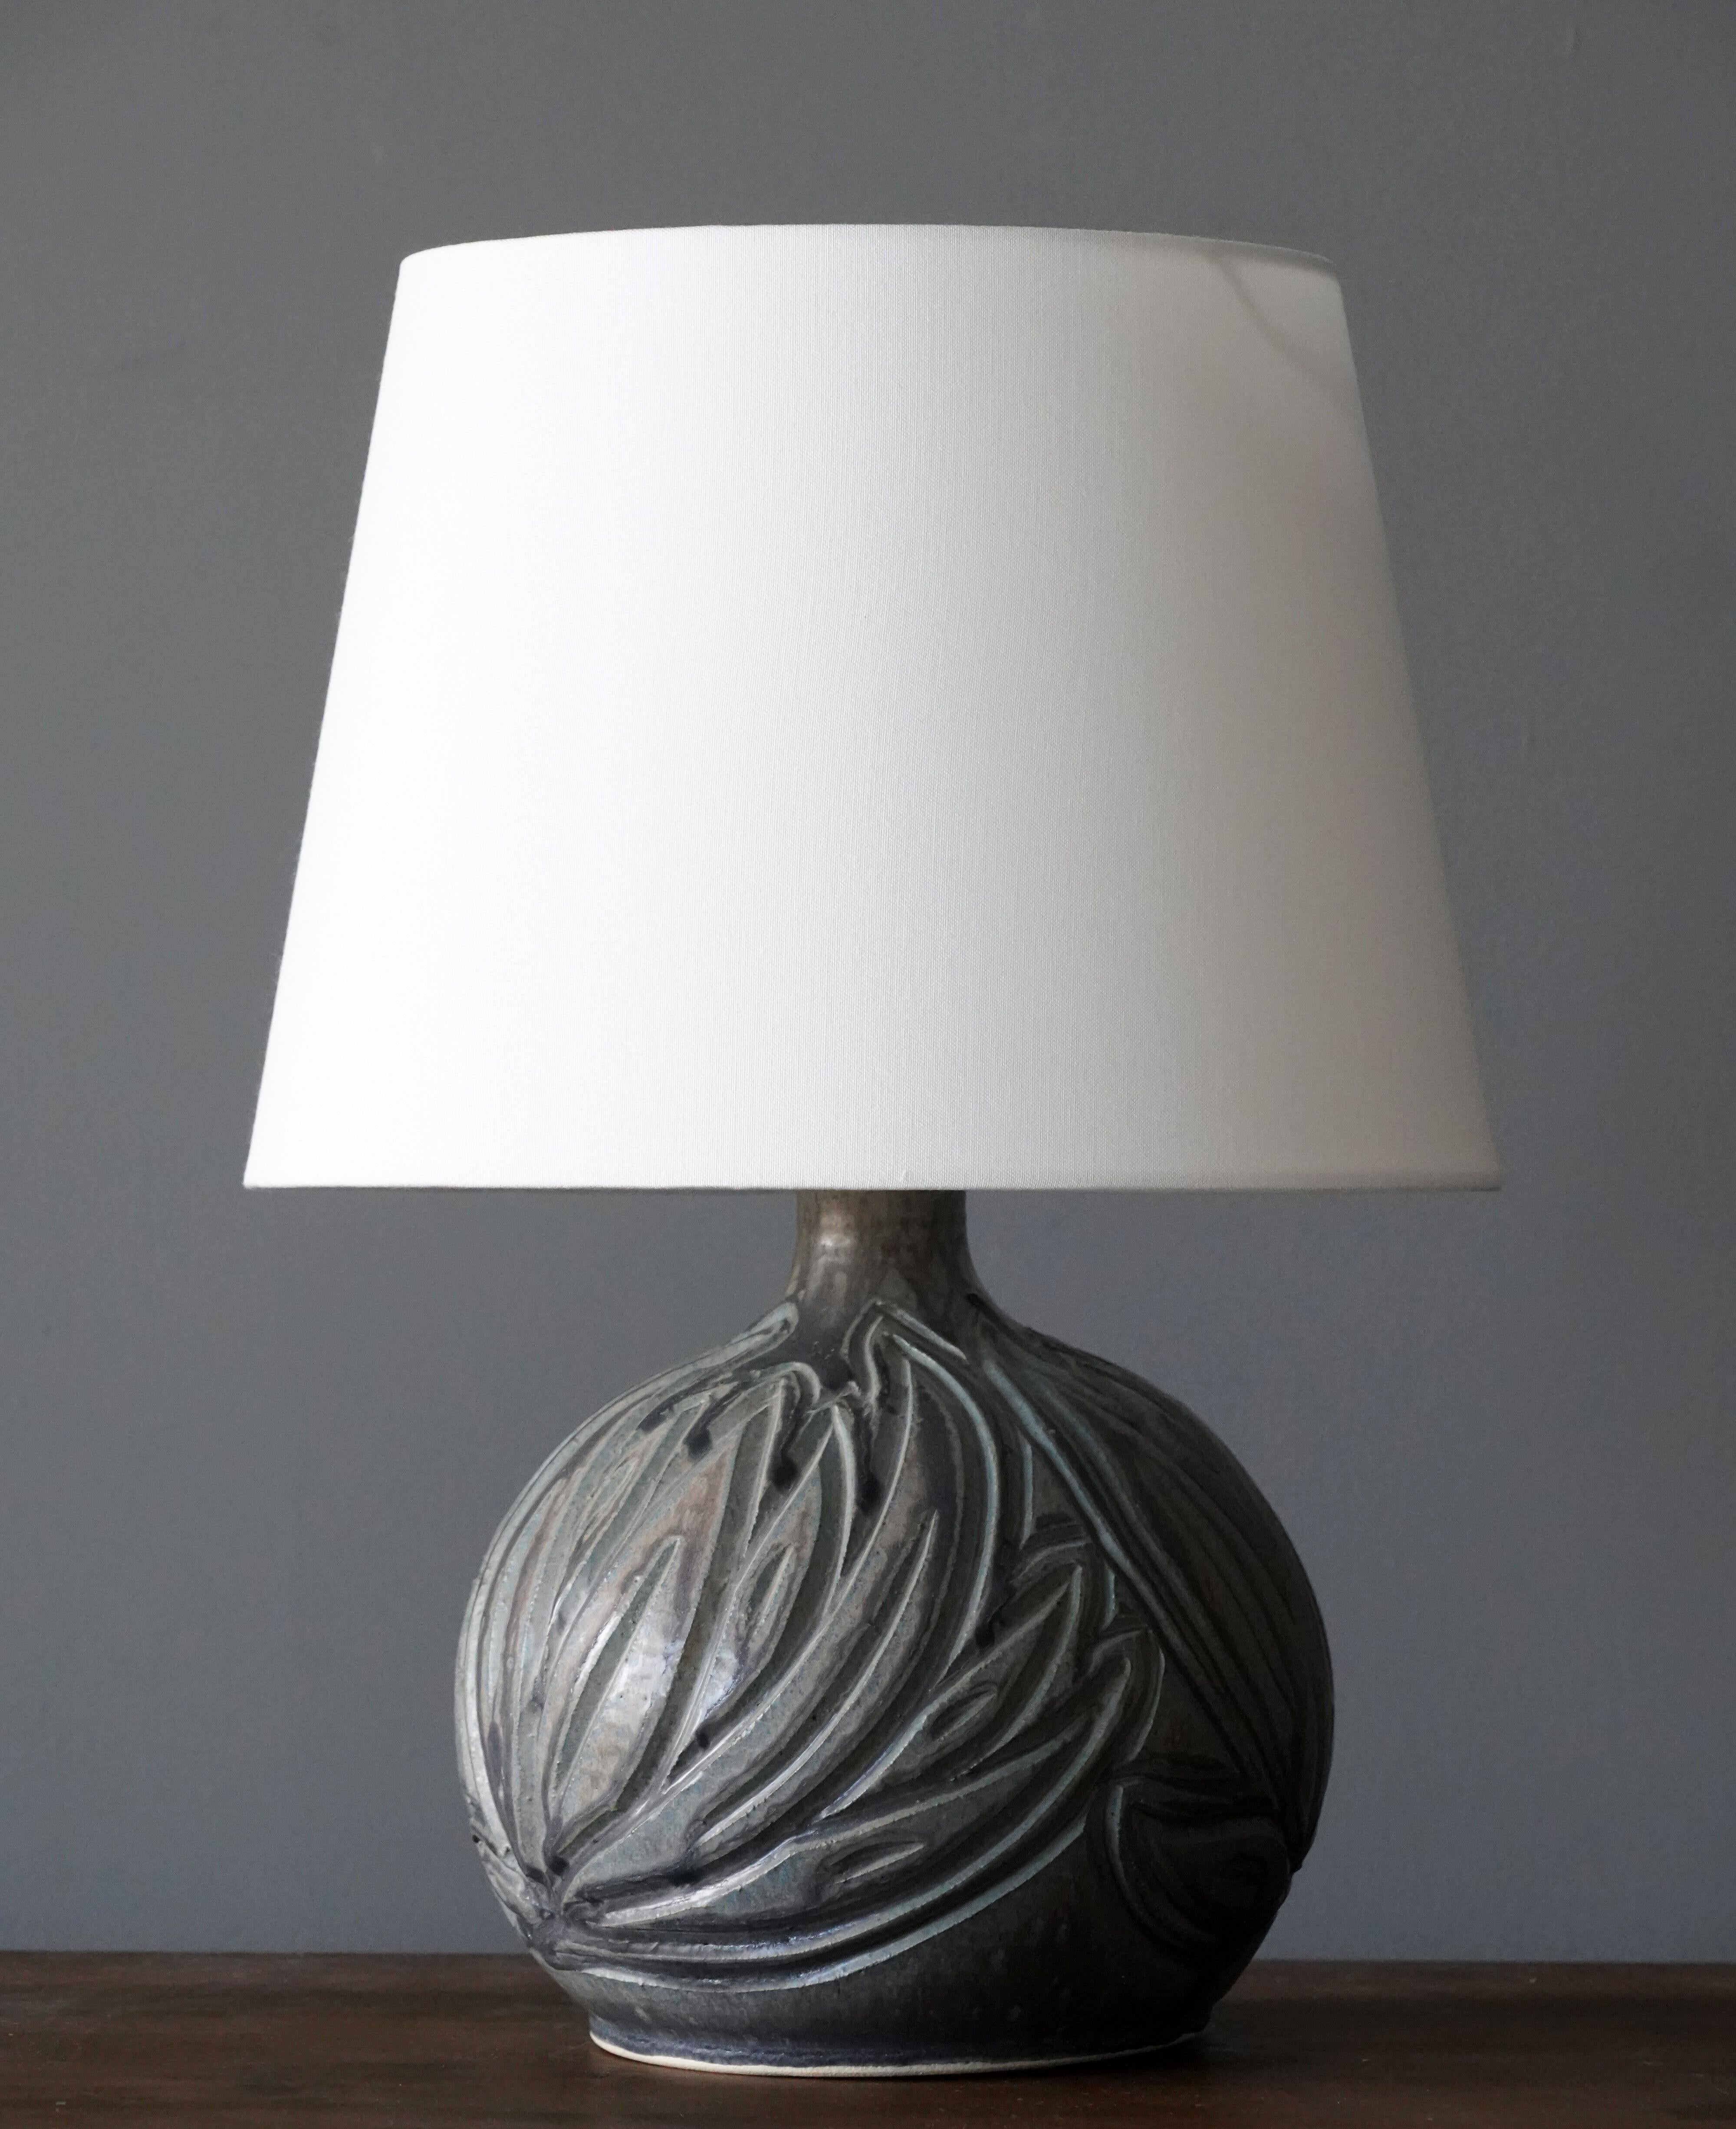 An organic table lamp produced and designed by Løvemose, Denmark, 1960s. With makers label.

Lampshade is attached for reference and are not included in the purchase. Measured without lampshade.

Glaze features grey-green colors with hints of